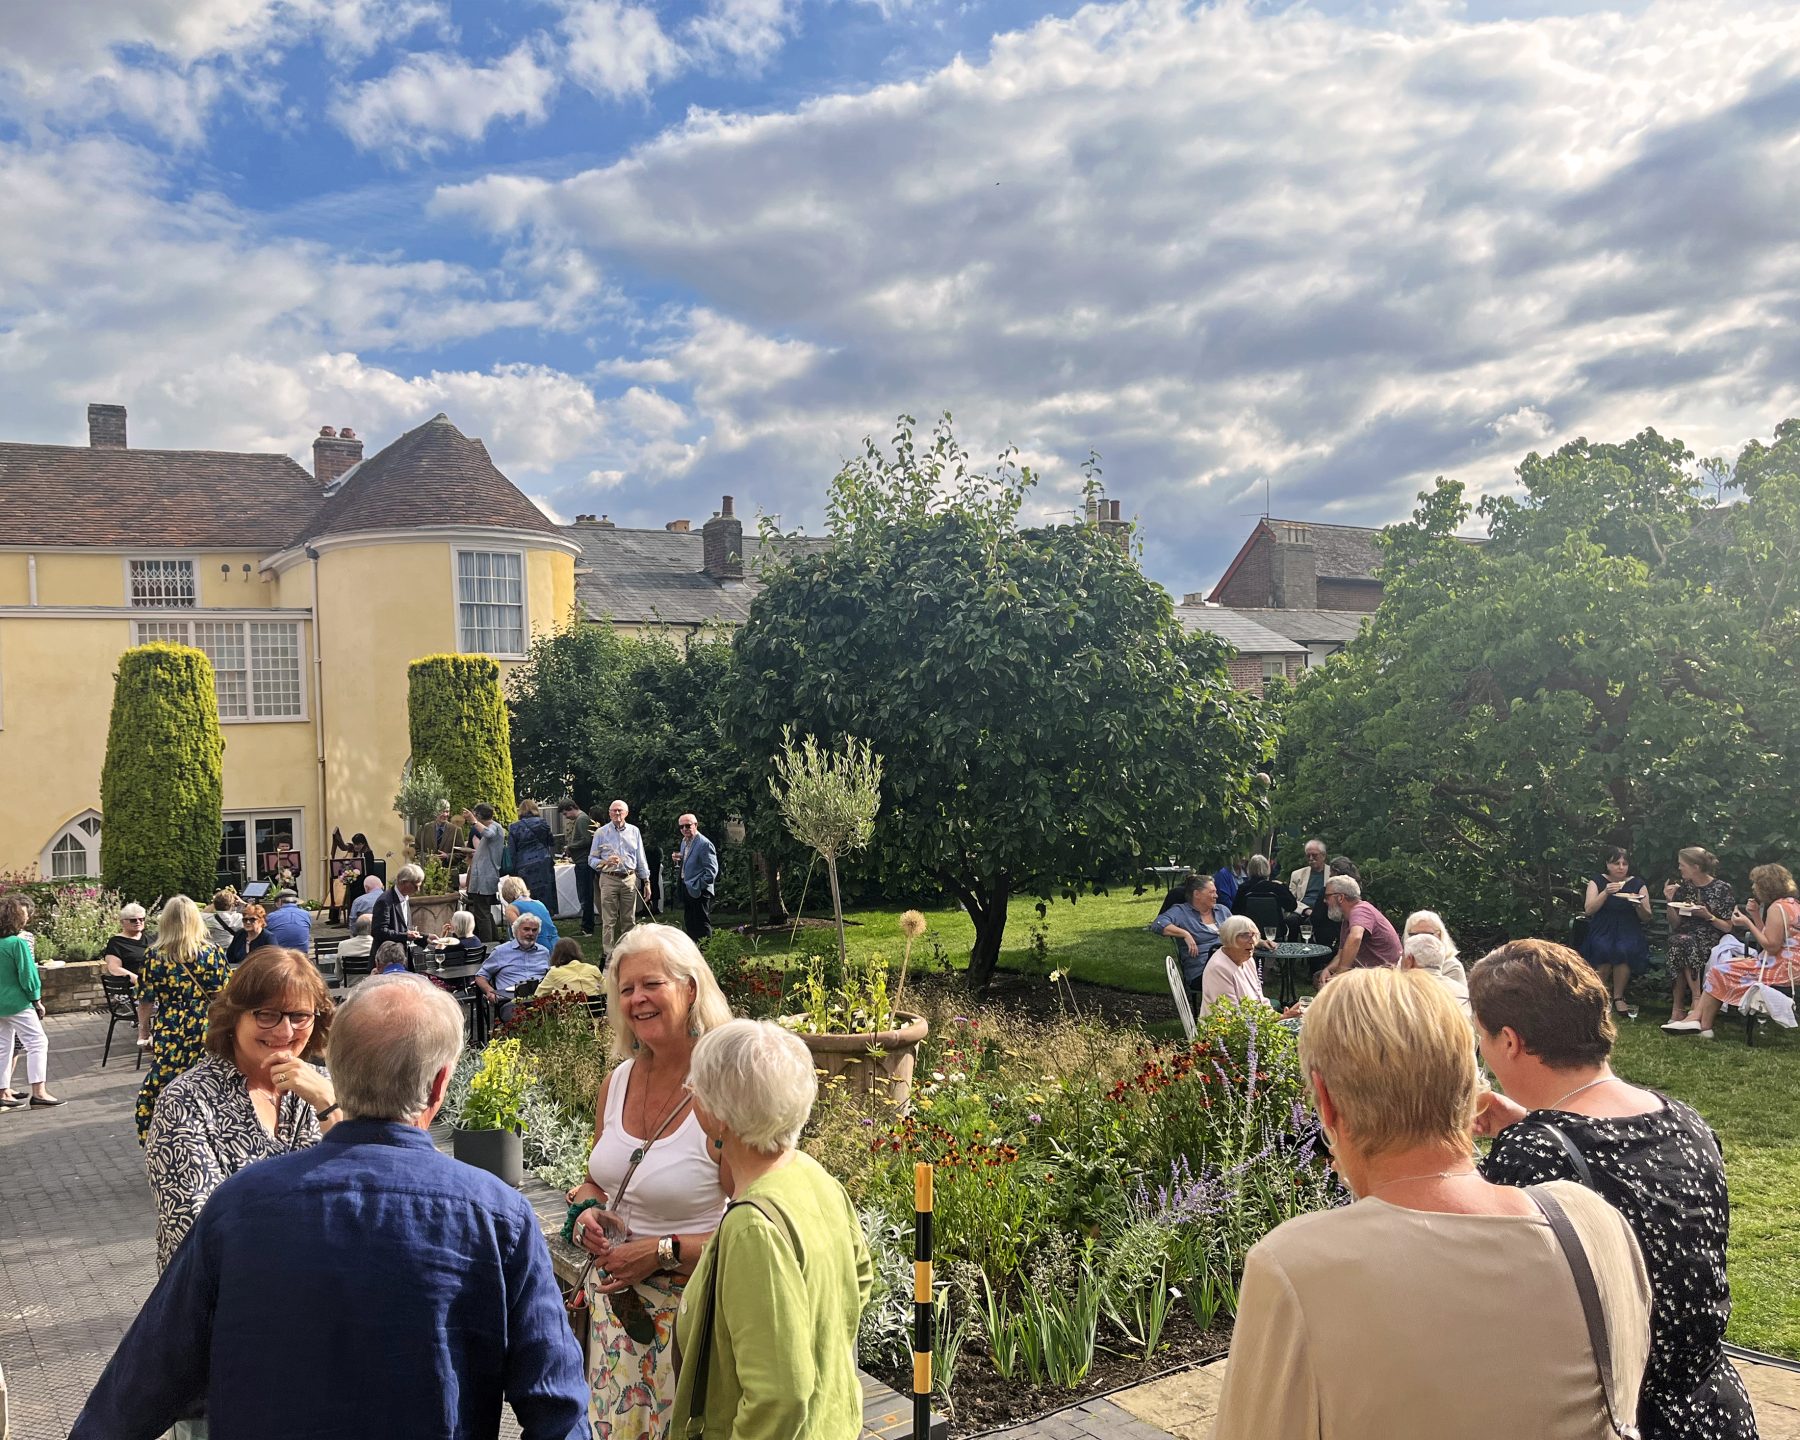 An image taken at the Annual Friends Garden Party at Gainsborough's House in 2023. There are lots of groups of people enjoying themselves in the sun.